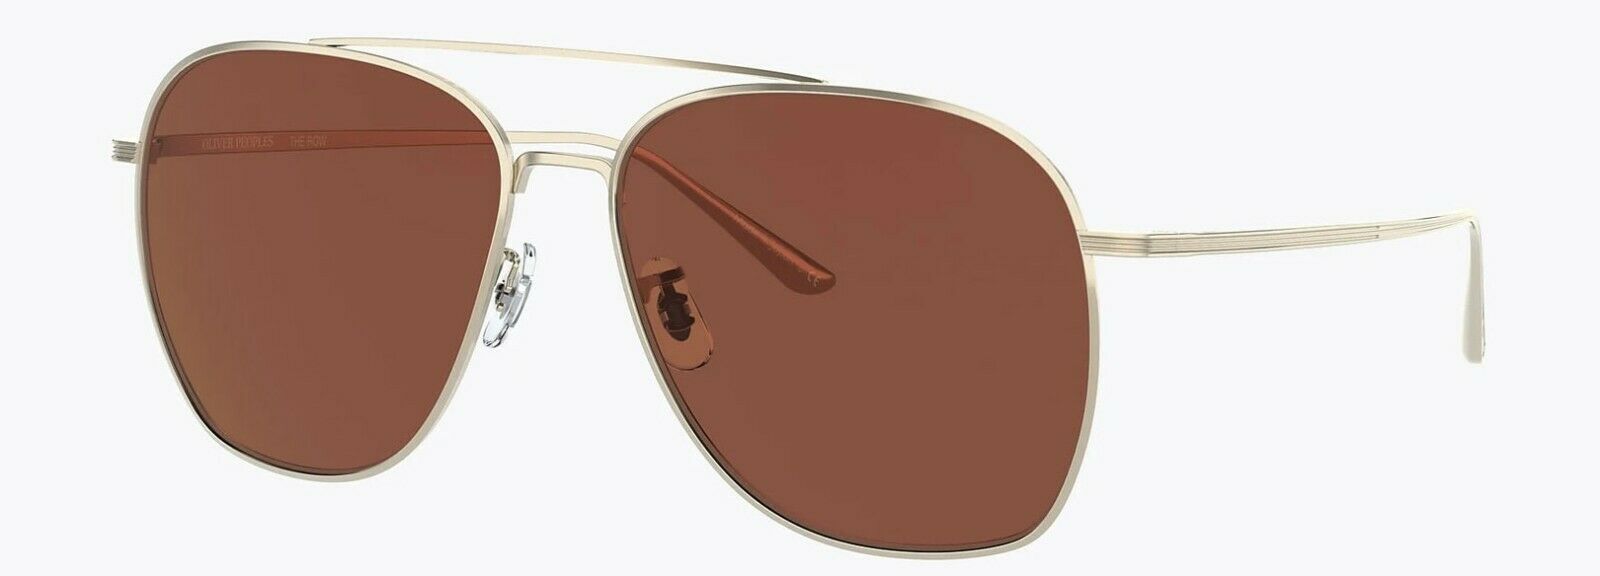 Oliver Peoples Sunglasses 1278ST 5292C5 The Row Ellerston Gold / Burgundy 58mm-827934450929-classypw.com-1